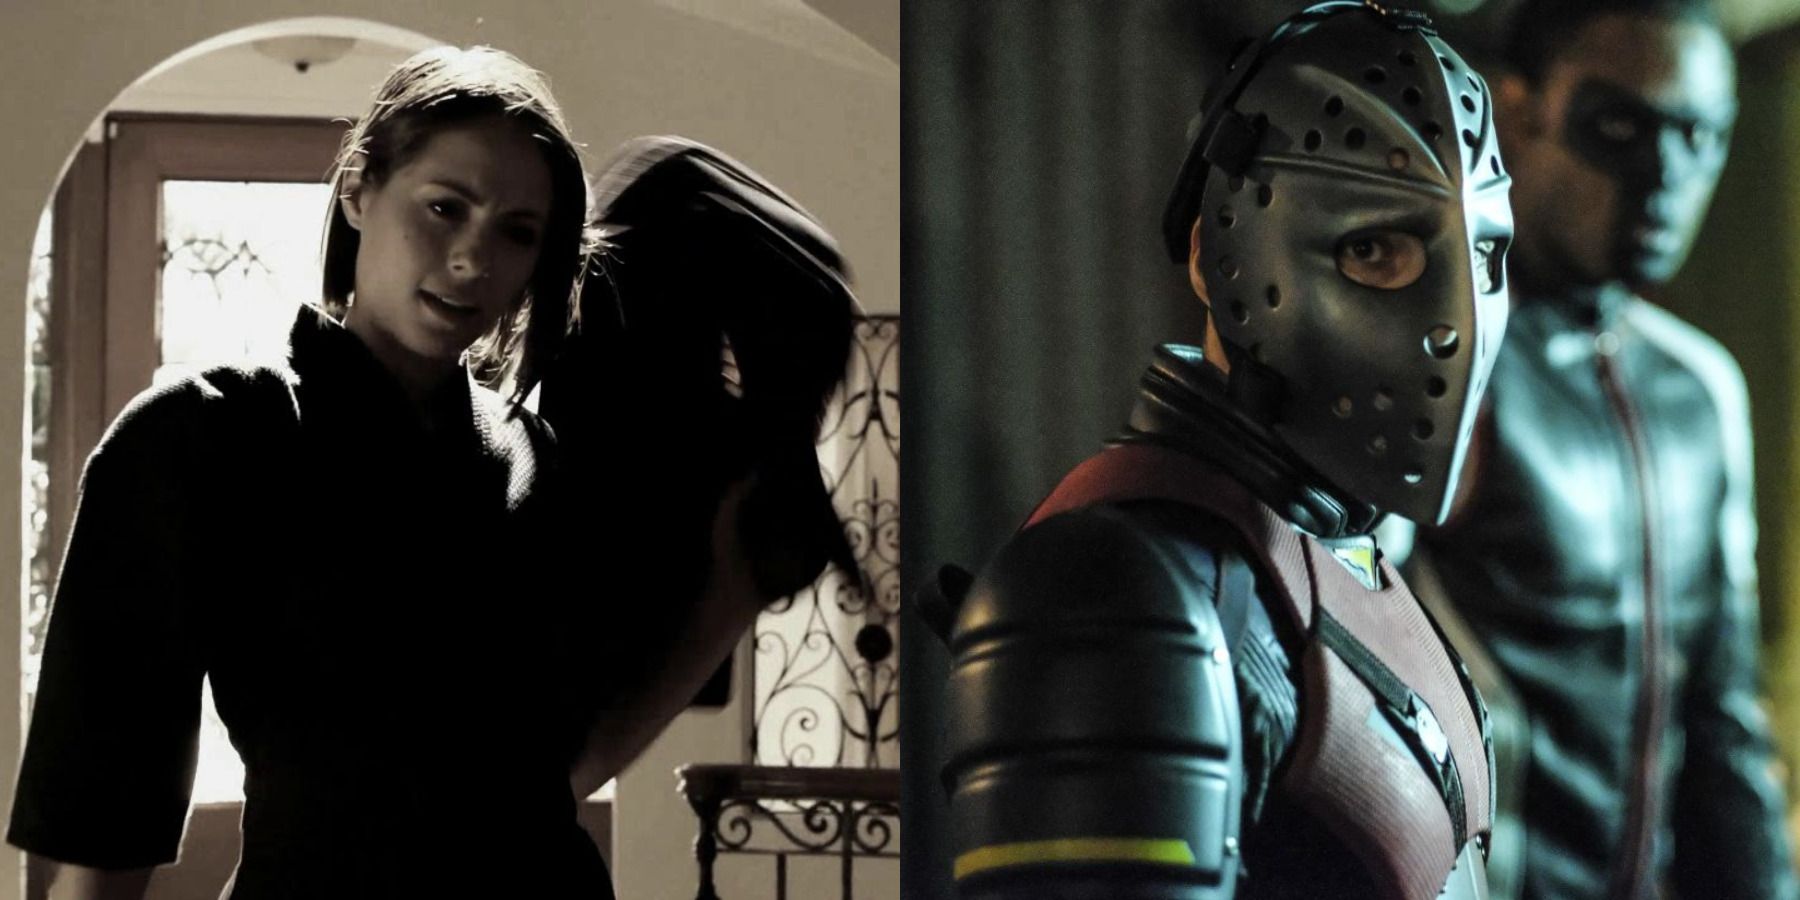 Arrow outfits feature split image - Thea Queen training at Corto Maltese and Wild Dog with Mister Terrific